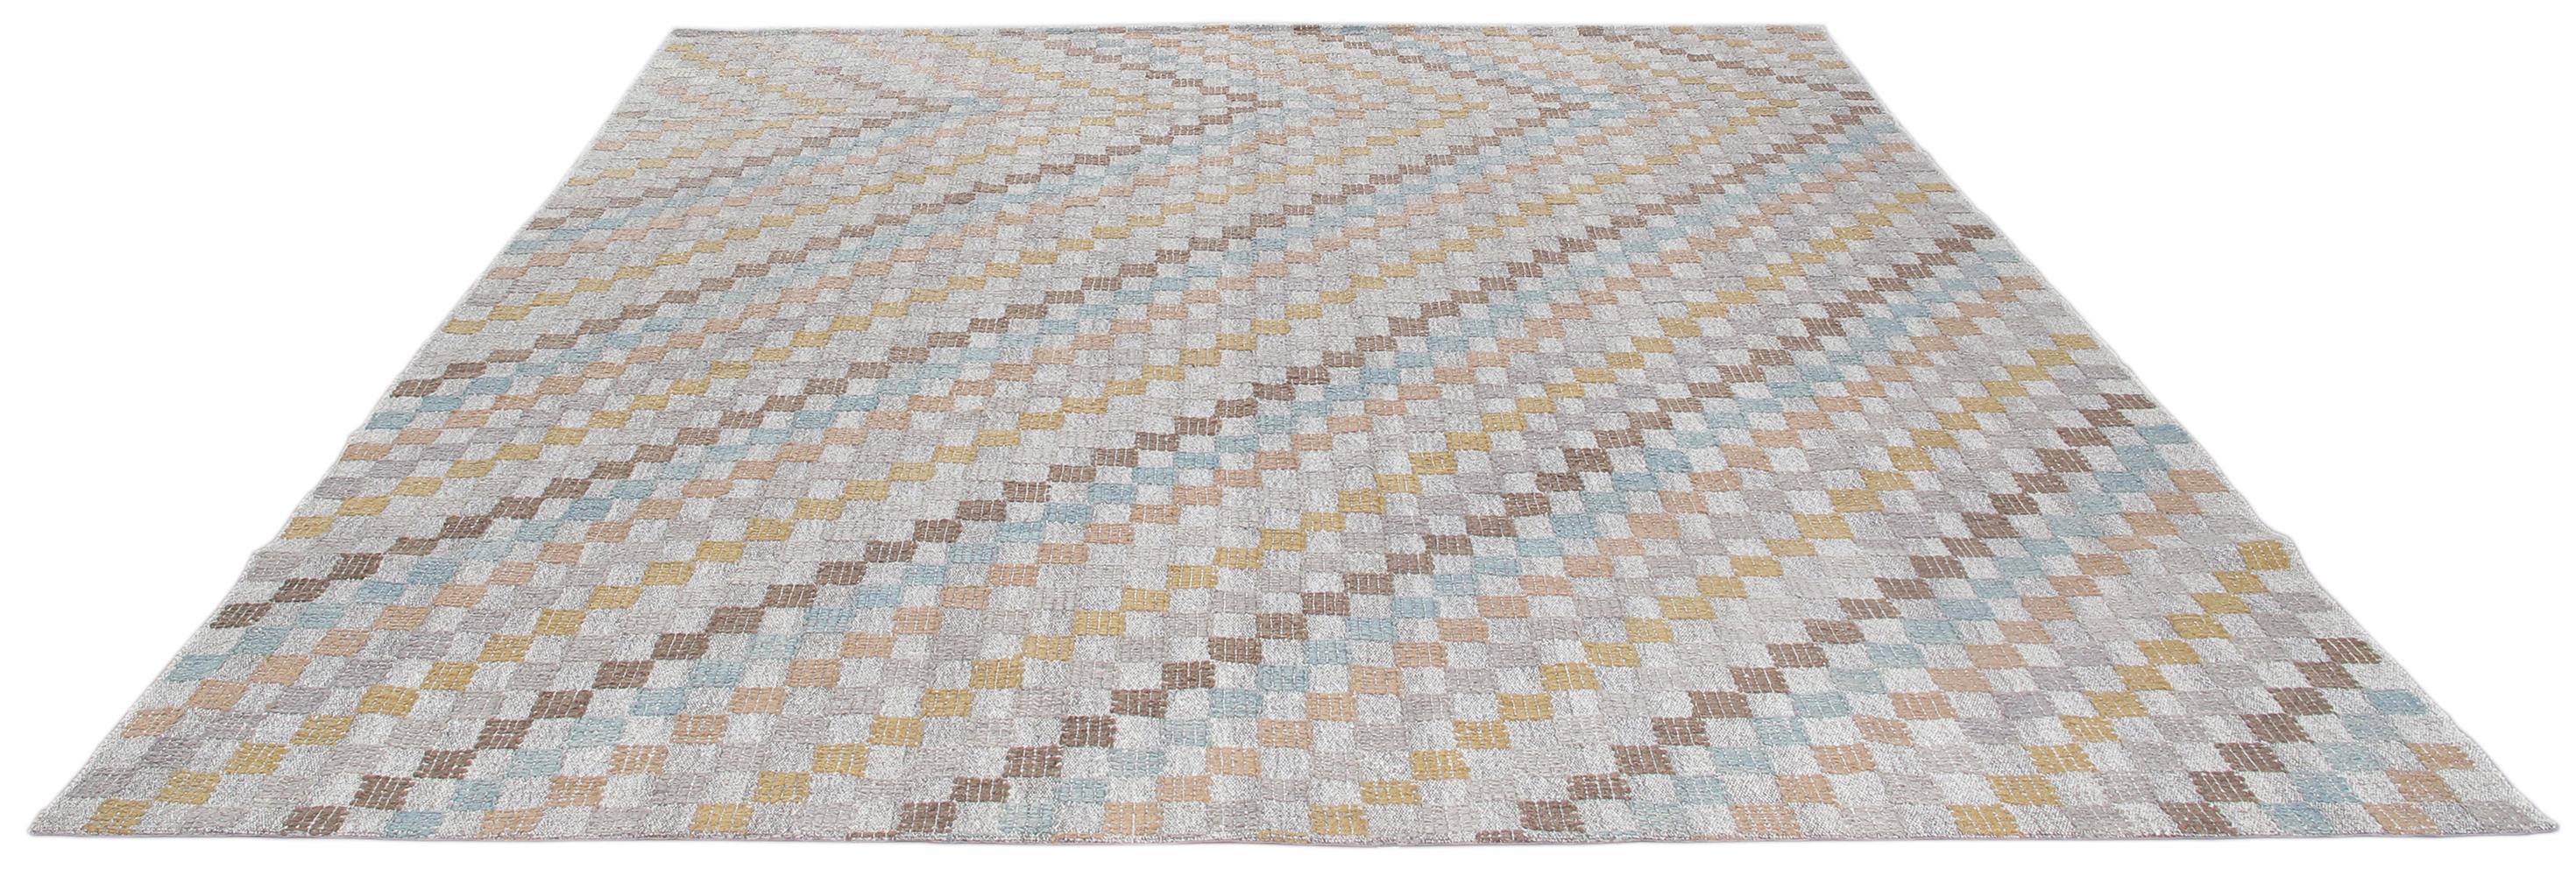 Turkish Mid-Century Modern Style Checkered Flatweave Rug For Sale